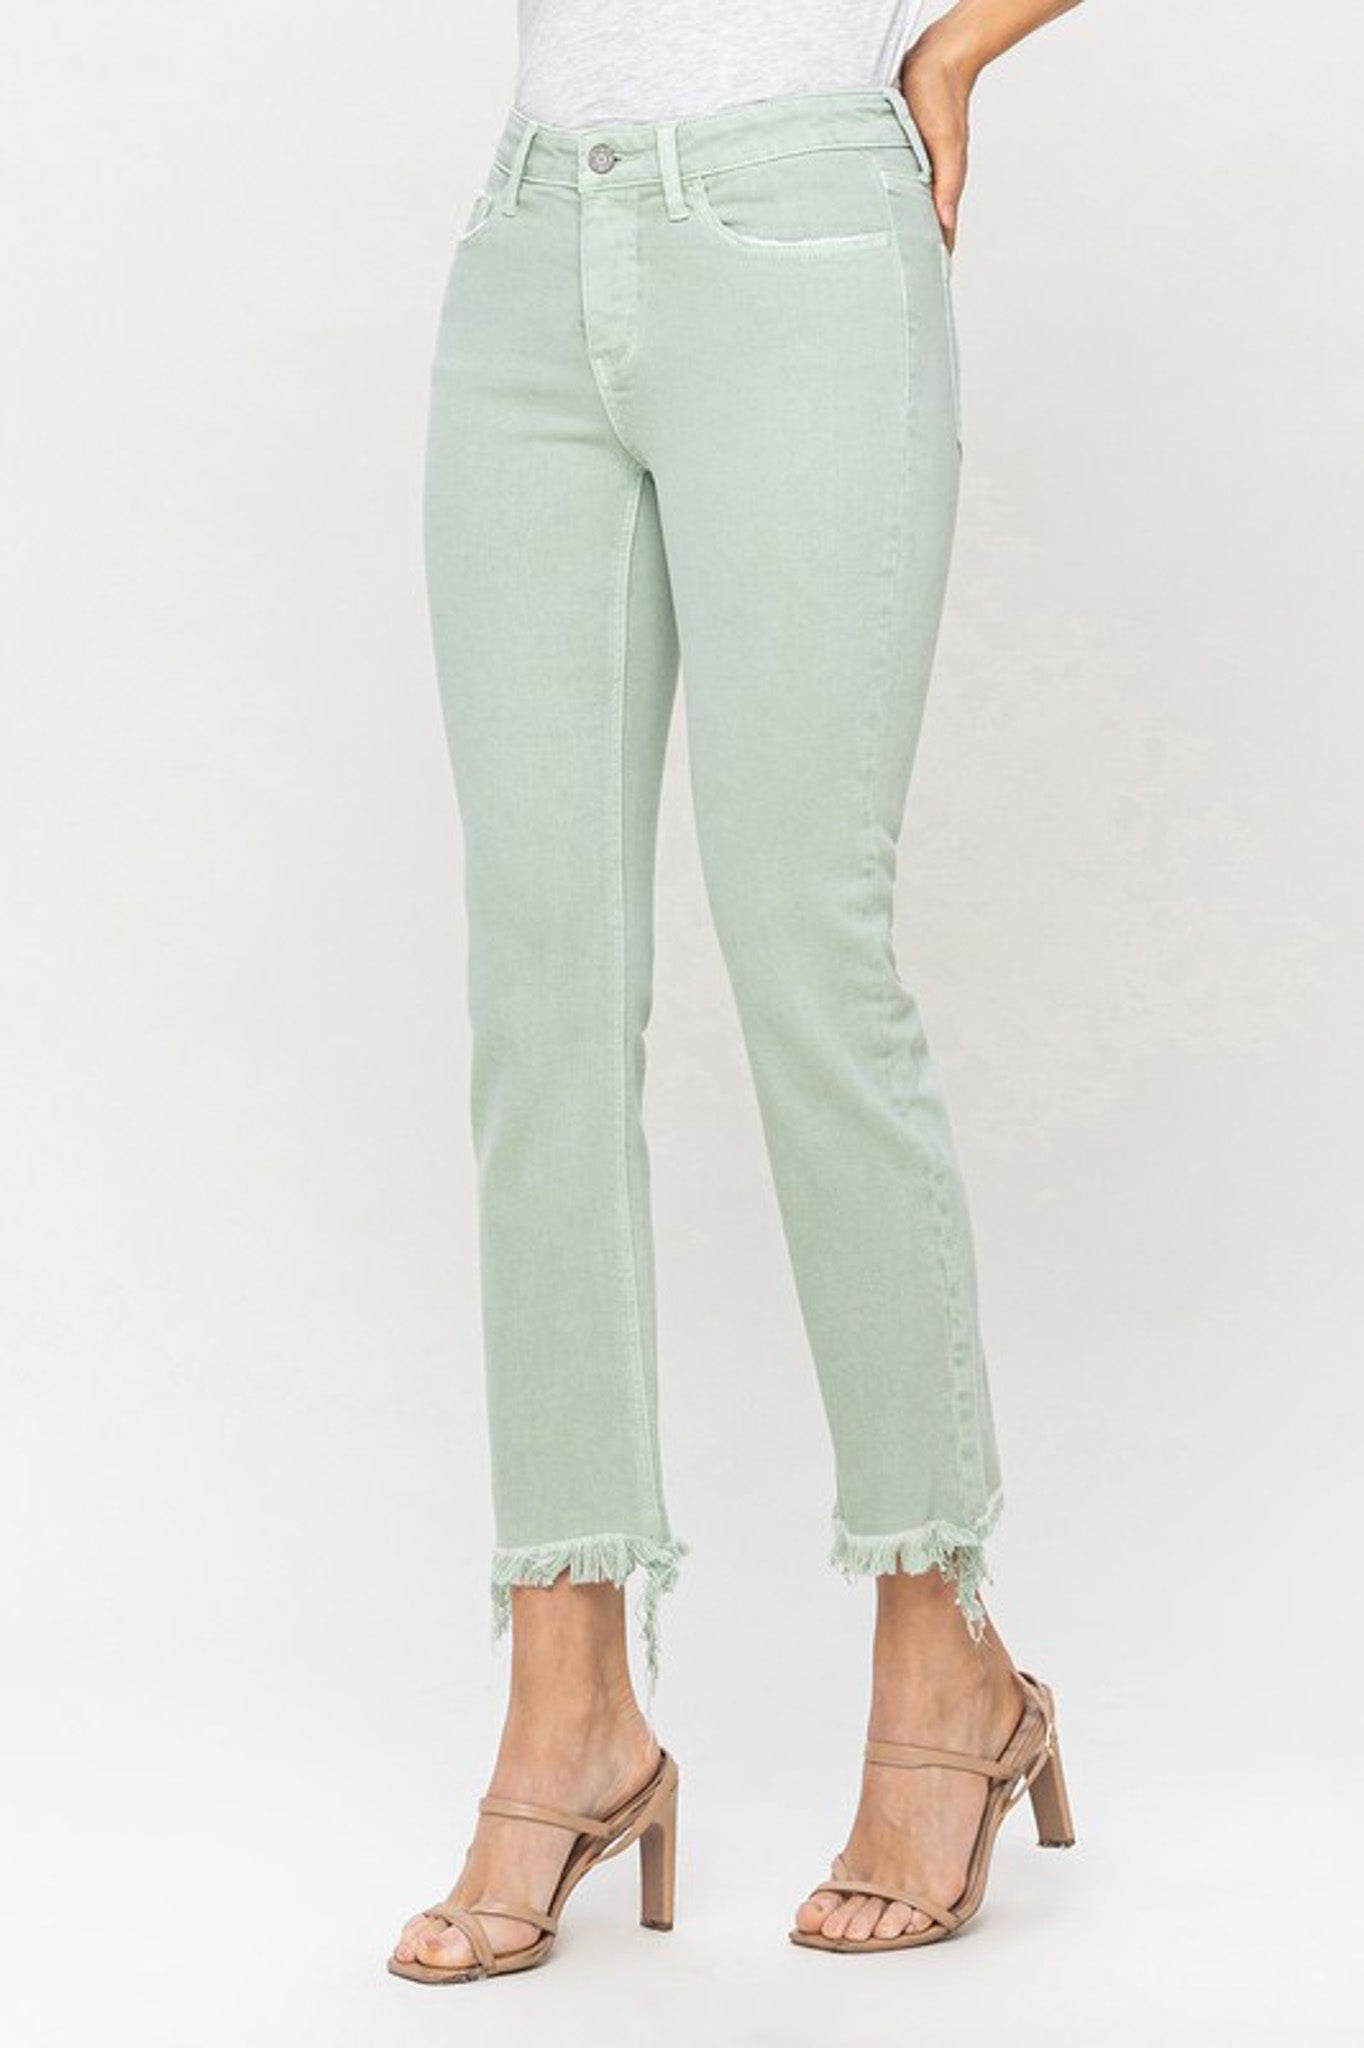 Mint Mid-Rise Slim Straight Jeans by Flying Monkey